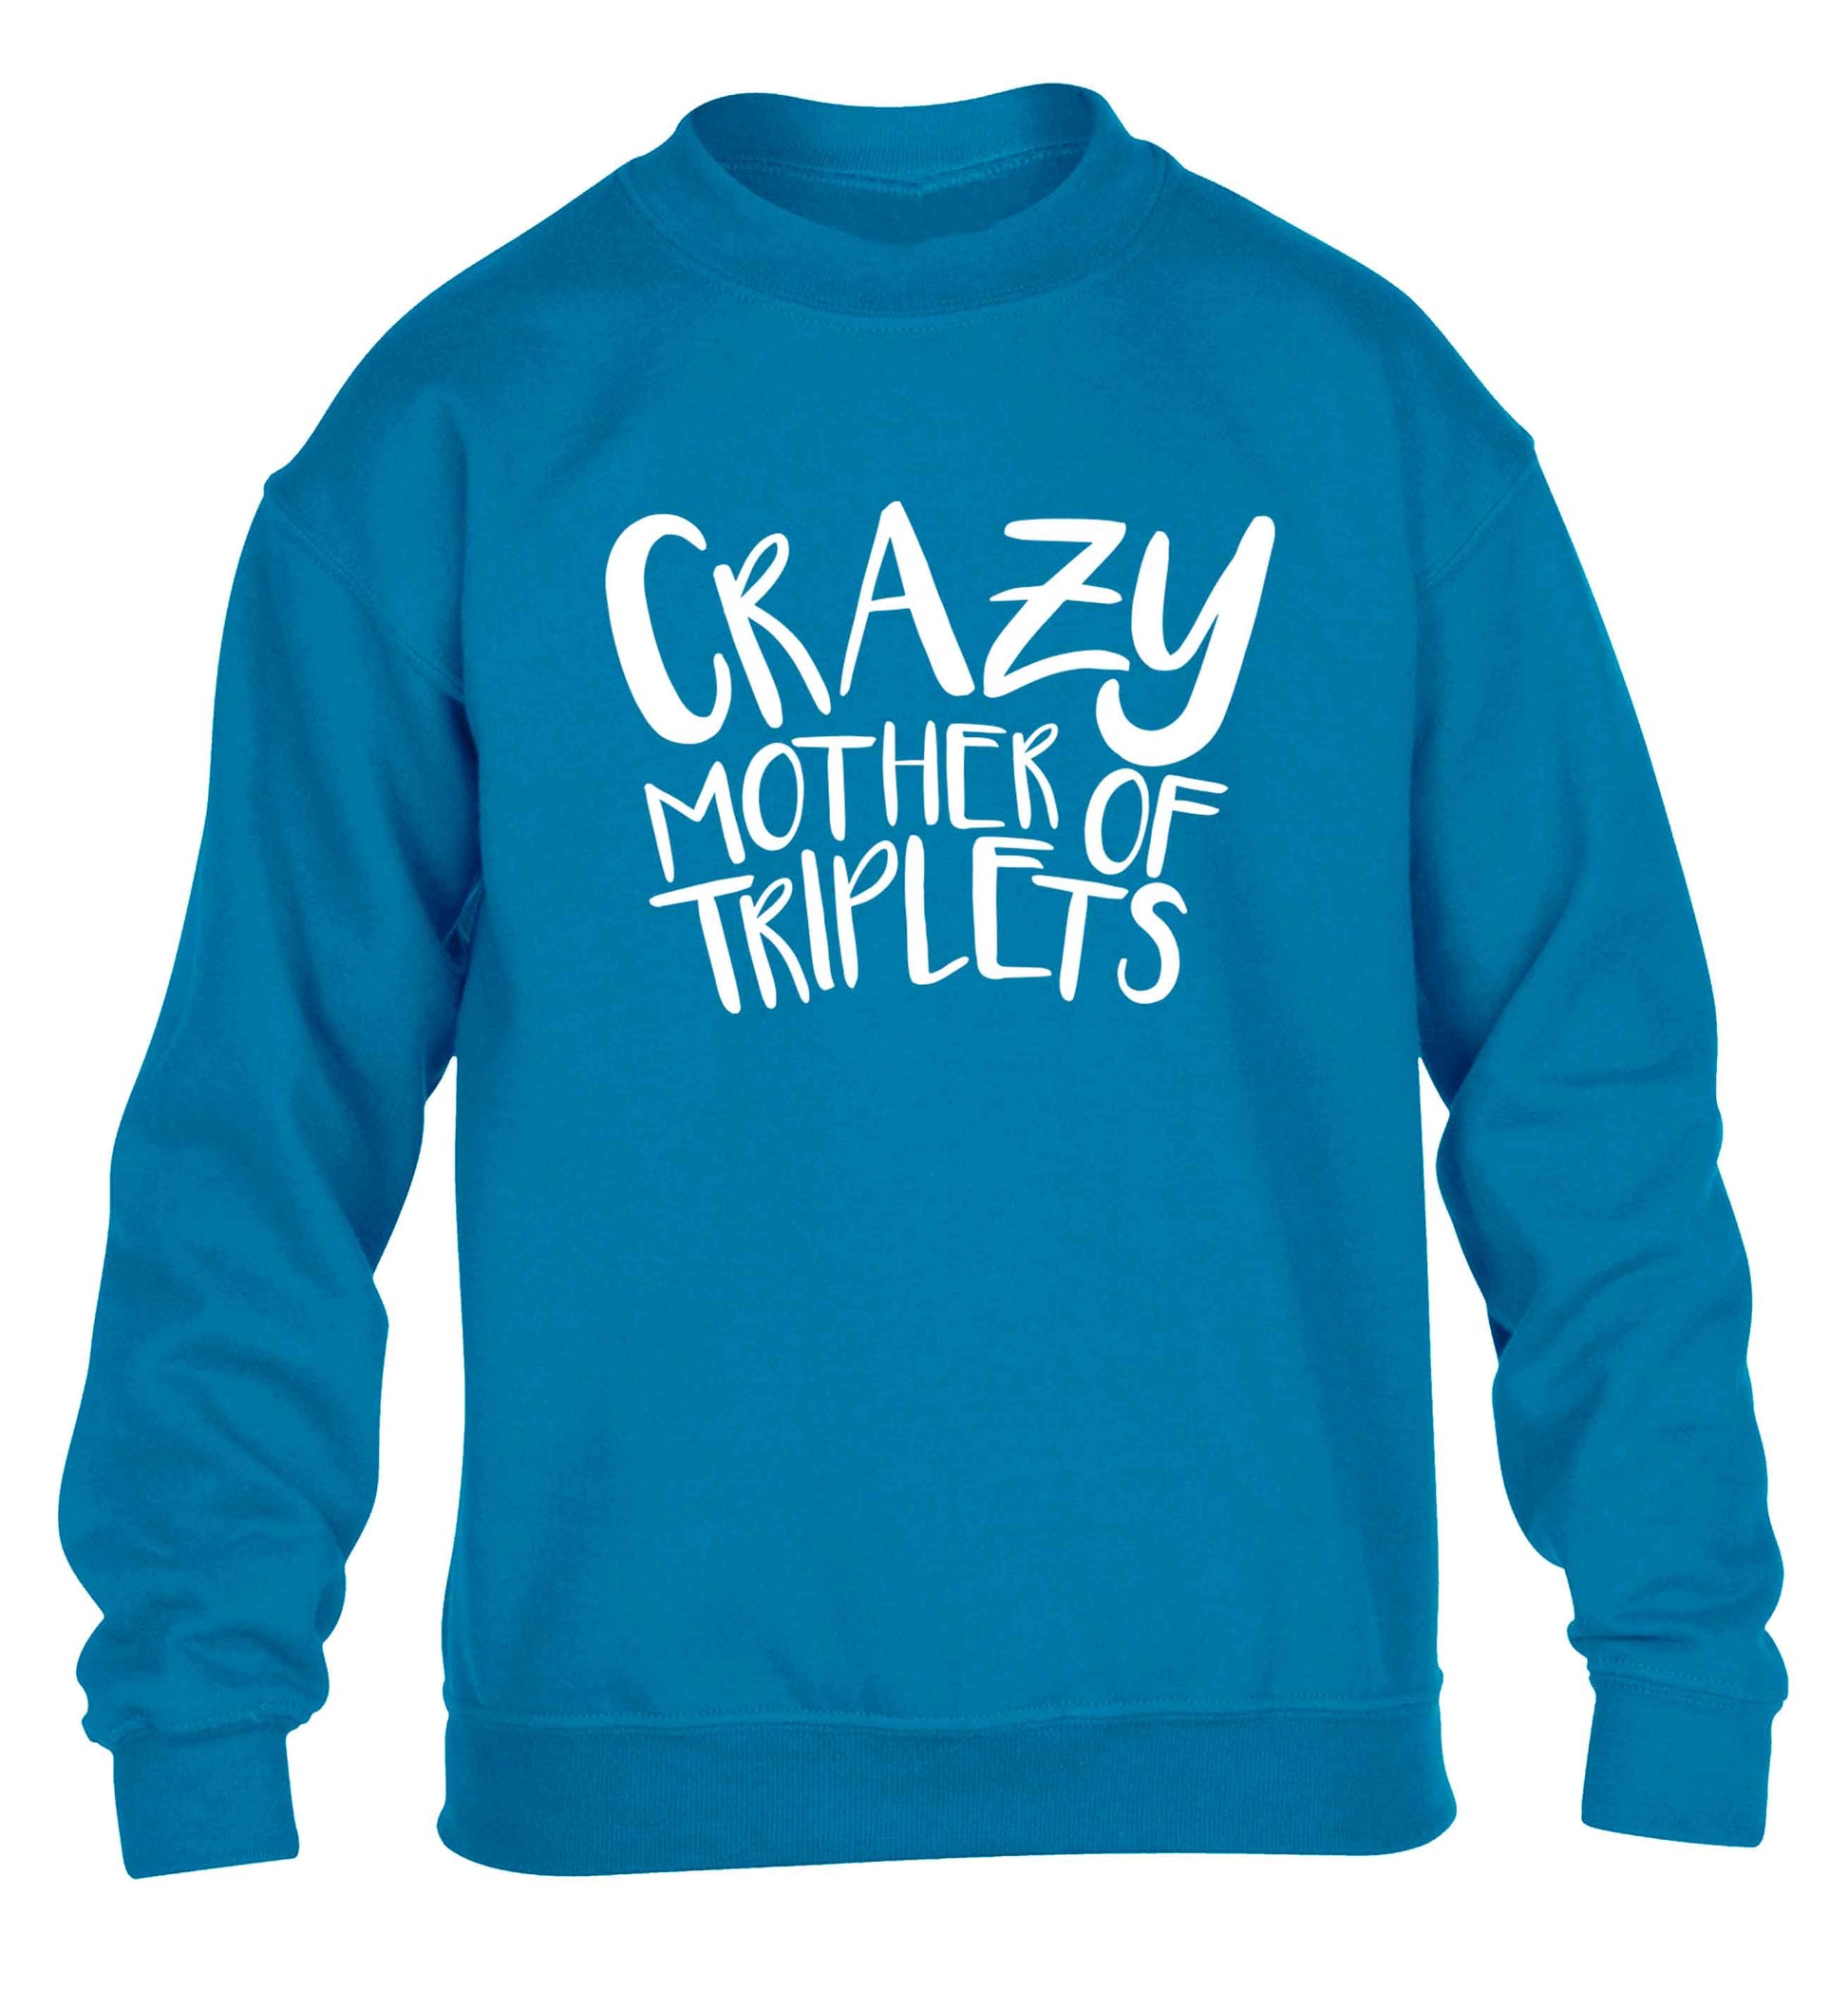 Crazy mother of triplets children's blue sweater 12-13 Years